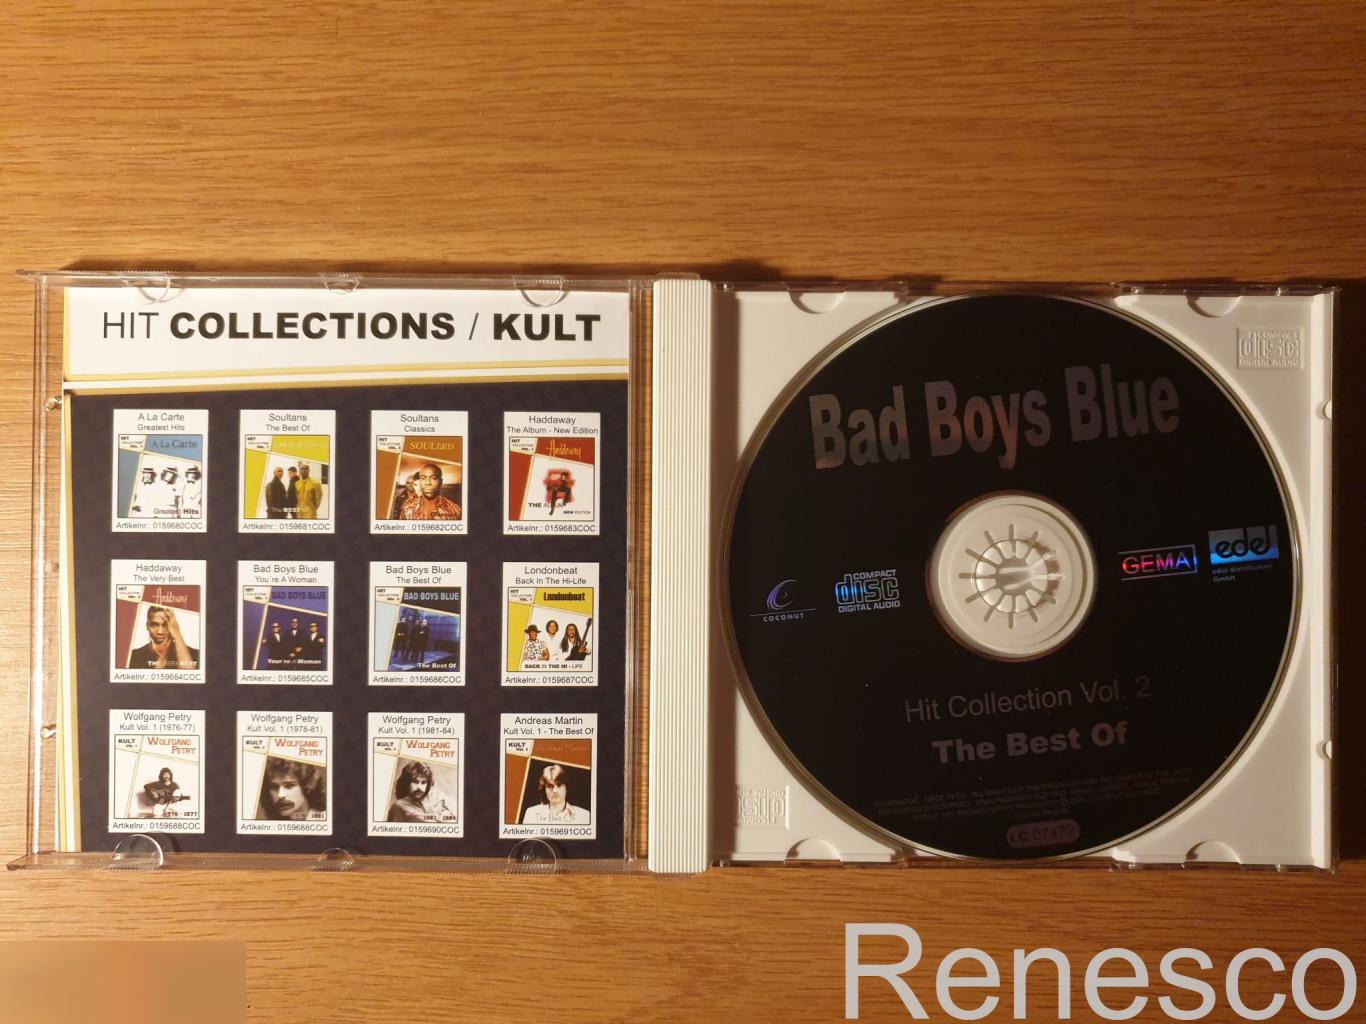 (CD) Bad Boys Blue ?– The Best Of - Hit Collection Vol. 2 (2004) (Germany) 2